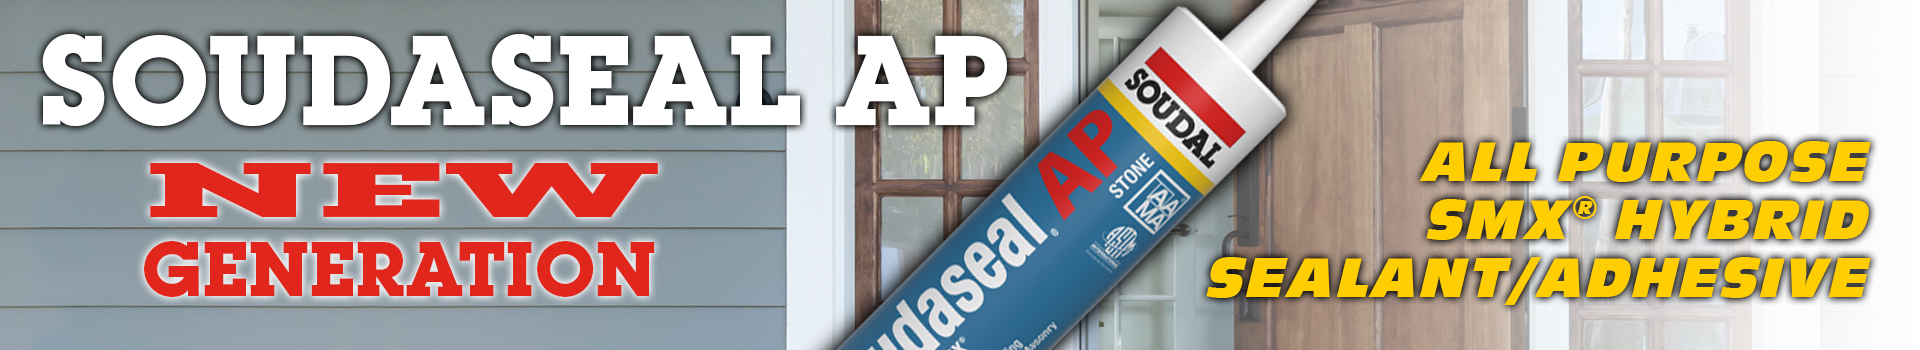 Soudalseal AP New Generation All Purpose SMX Hybrid Sealant/Adhesive